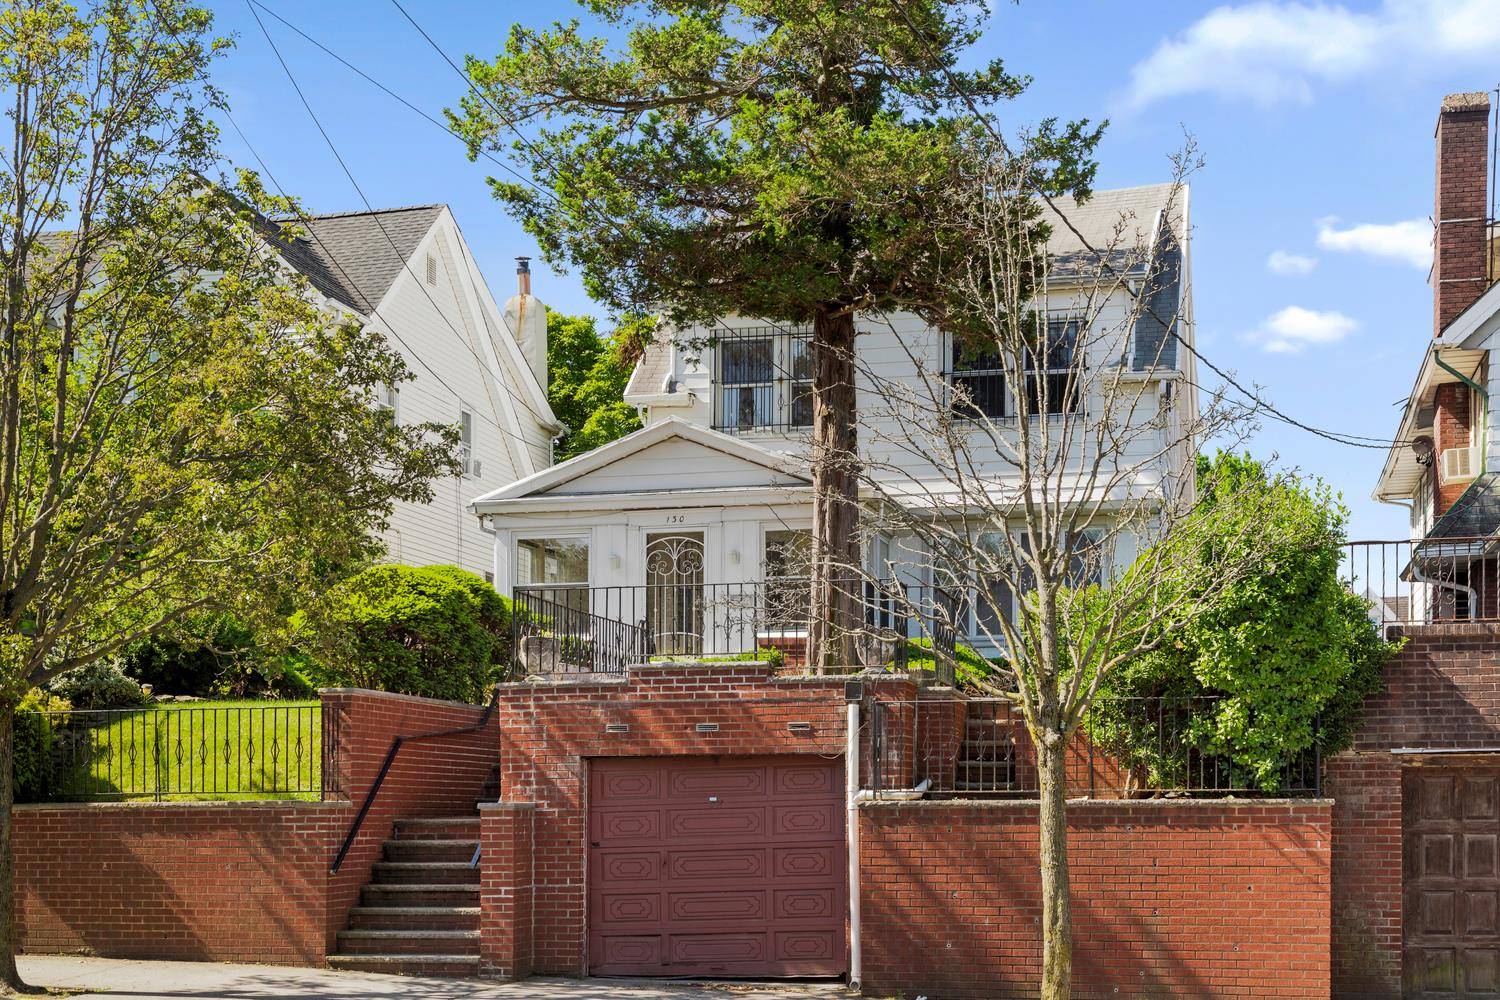 Majestic single family home with private driveway and huge front and back yards now available on one of Bay Ridge's finest blocks.